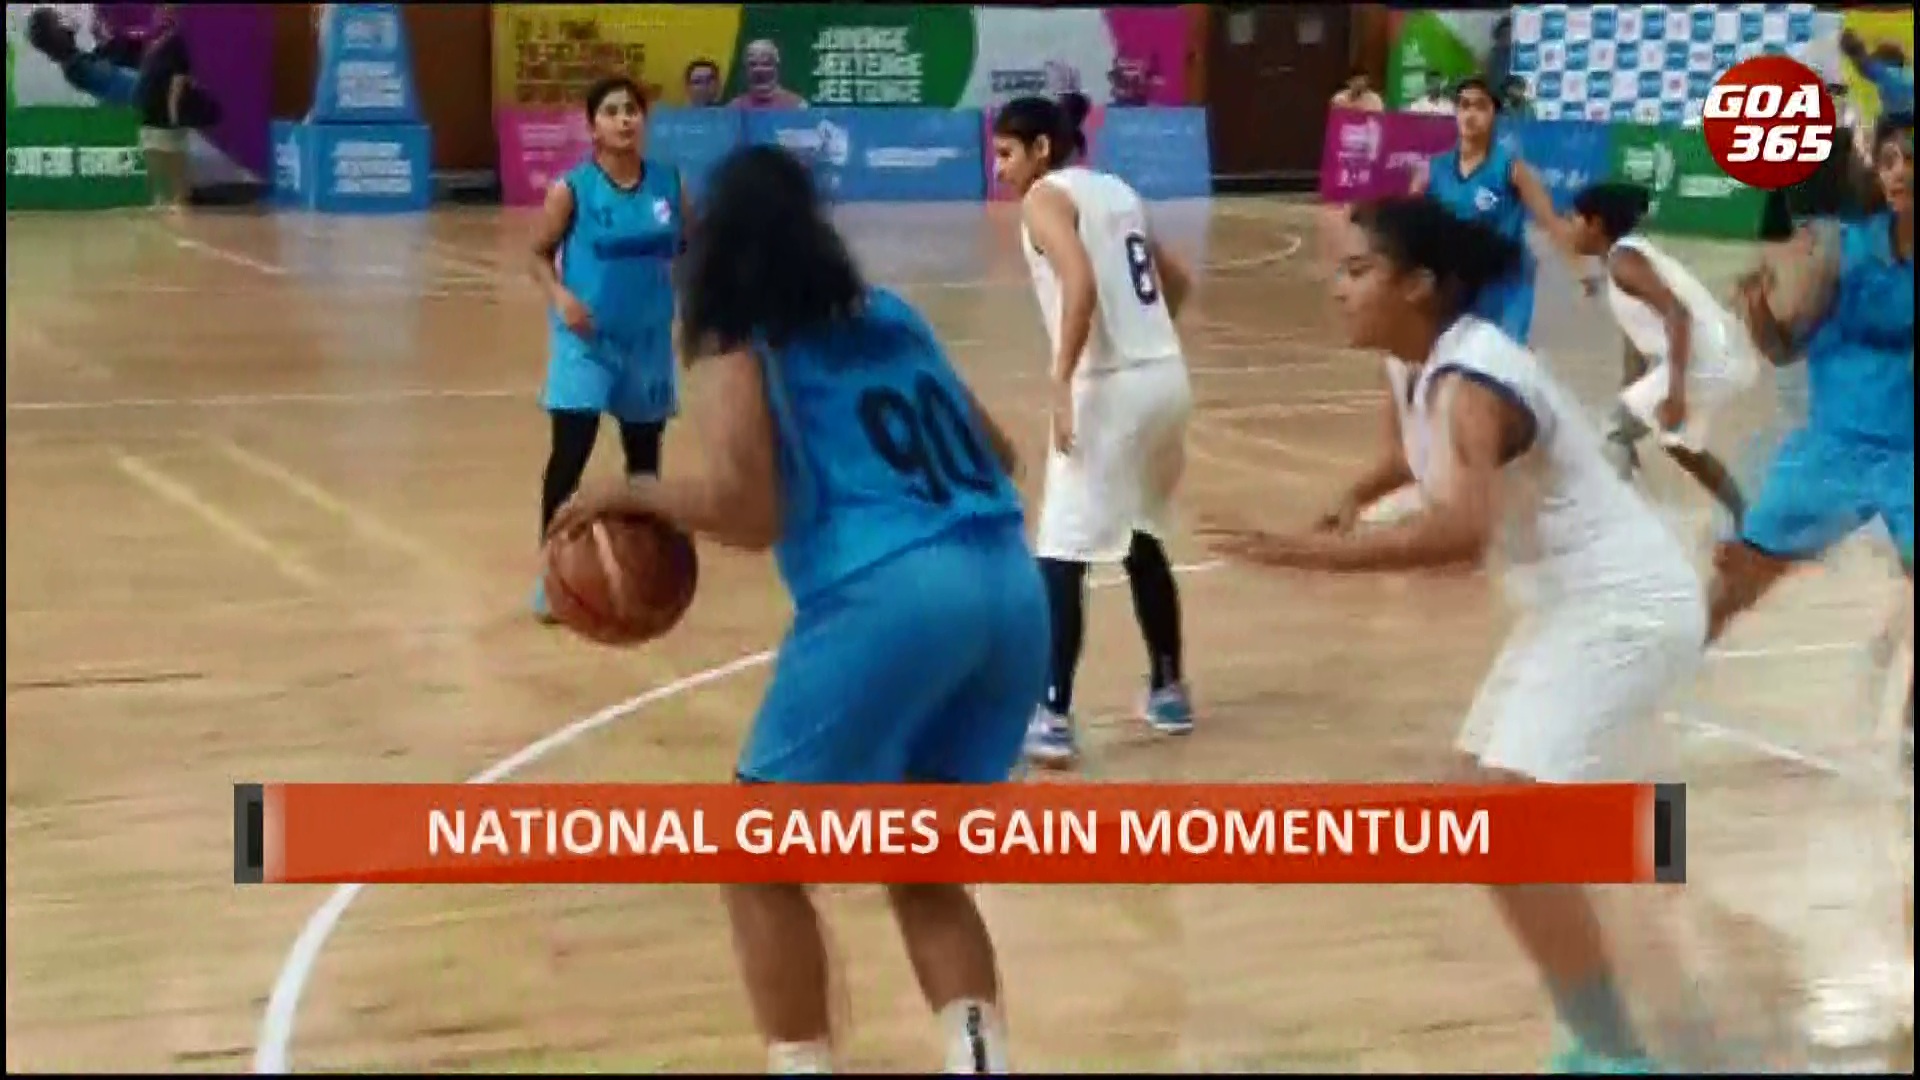 NATIONAL GAMES GOA: More Sports Take Stage as N.Games Gain Momentum  